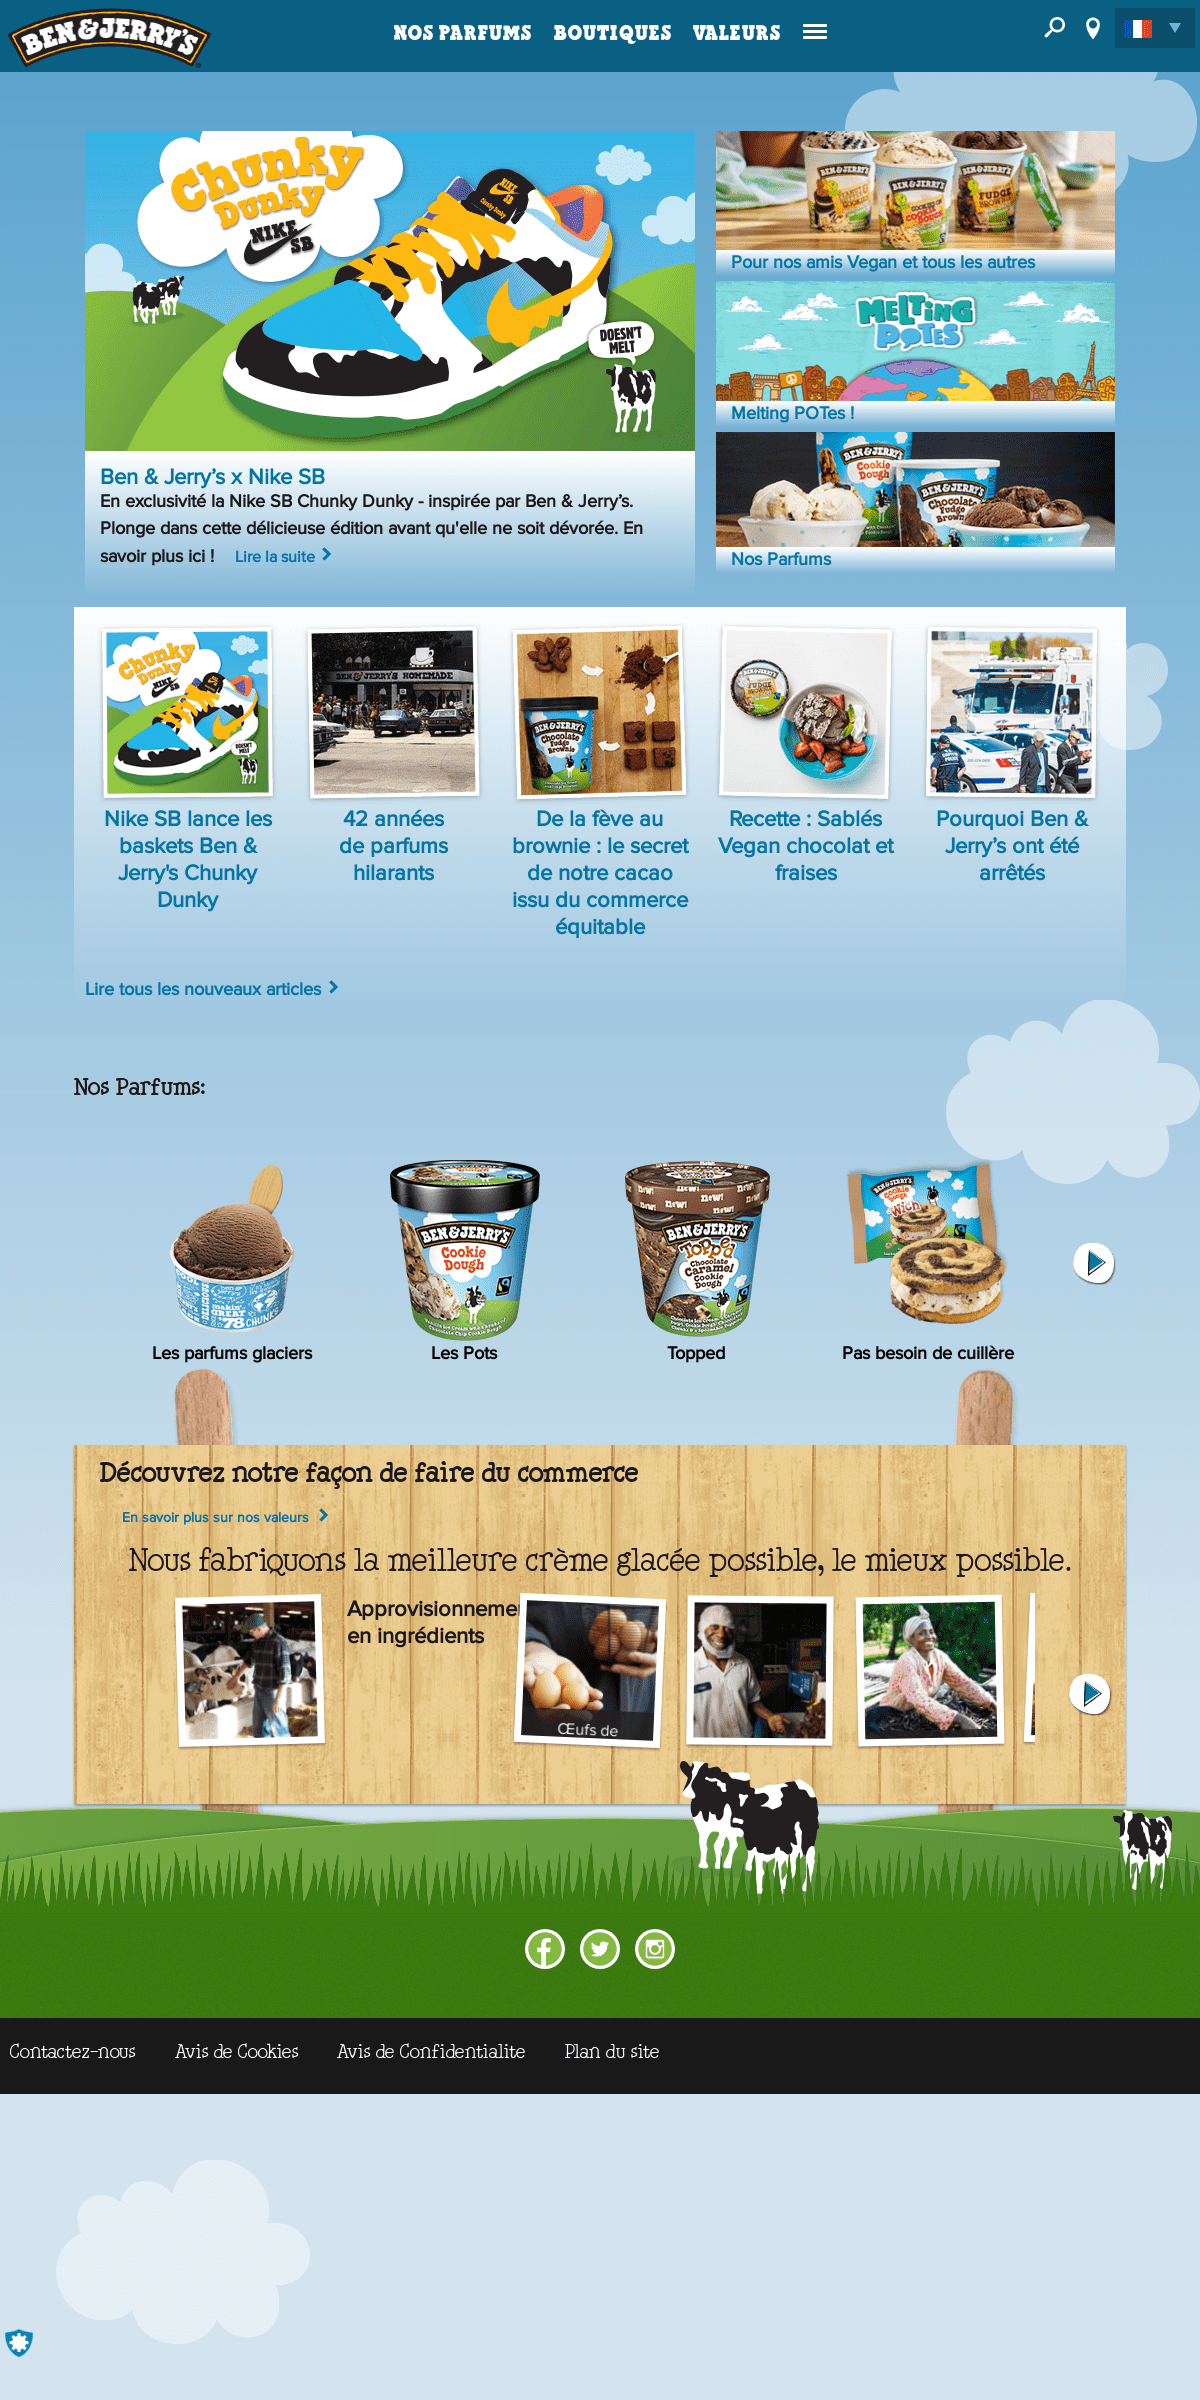 A complete backup of benjerry.fr